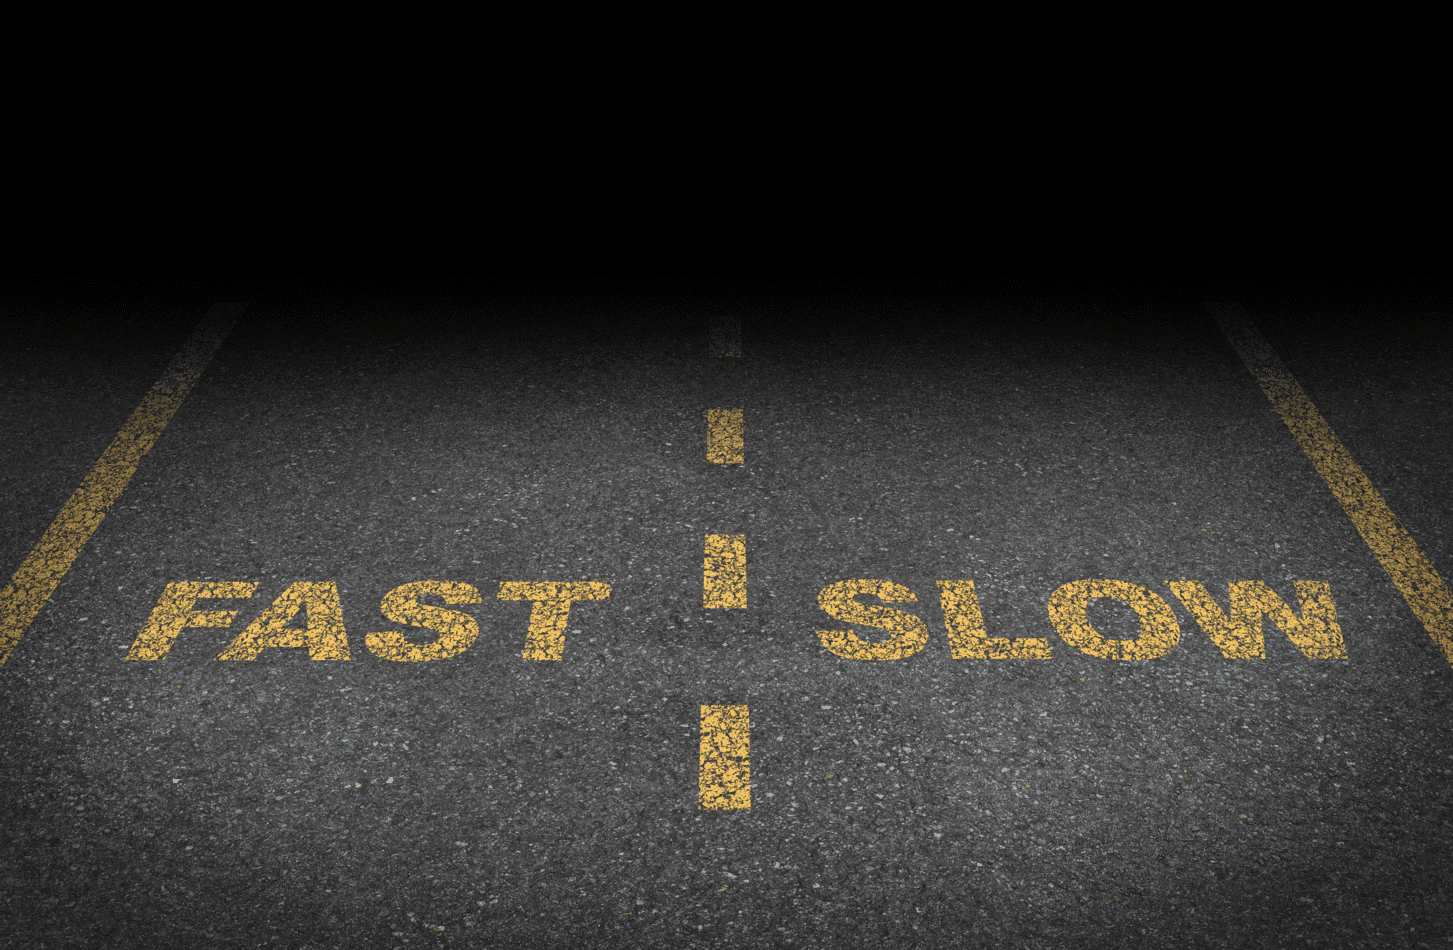 Paint designates the left lane as fast and the right lane as slow.